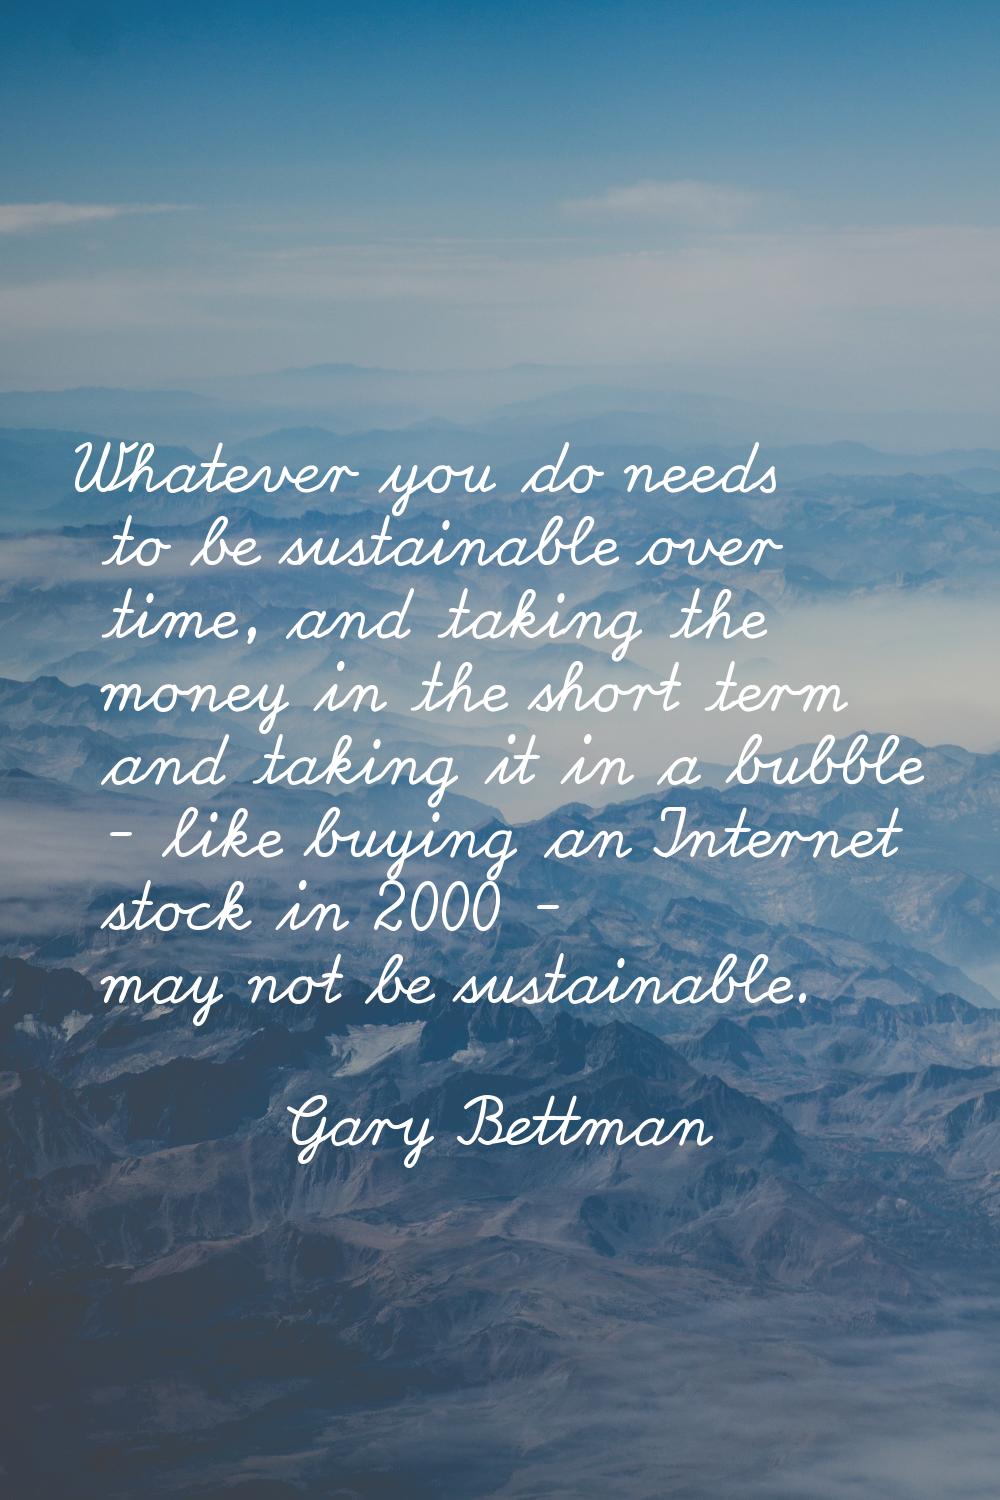 Whatever you do needs to be sustainable over time, and taking the money in the short term and takin